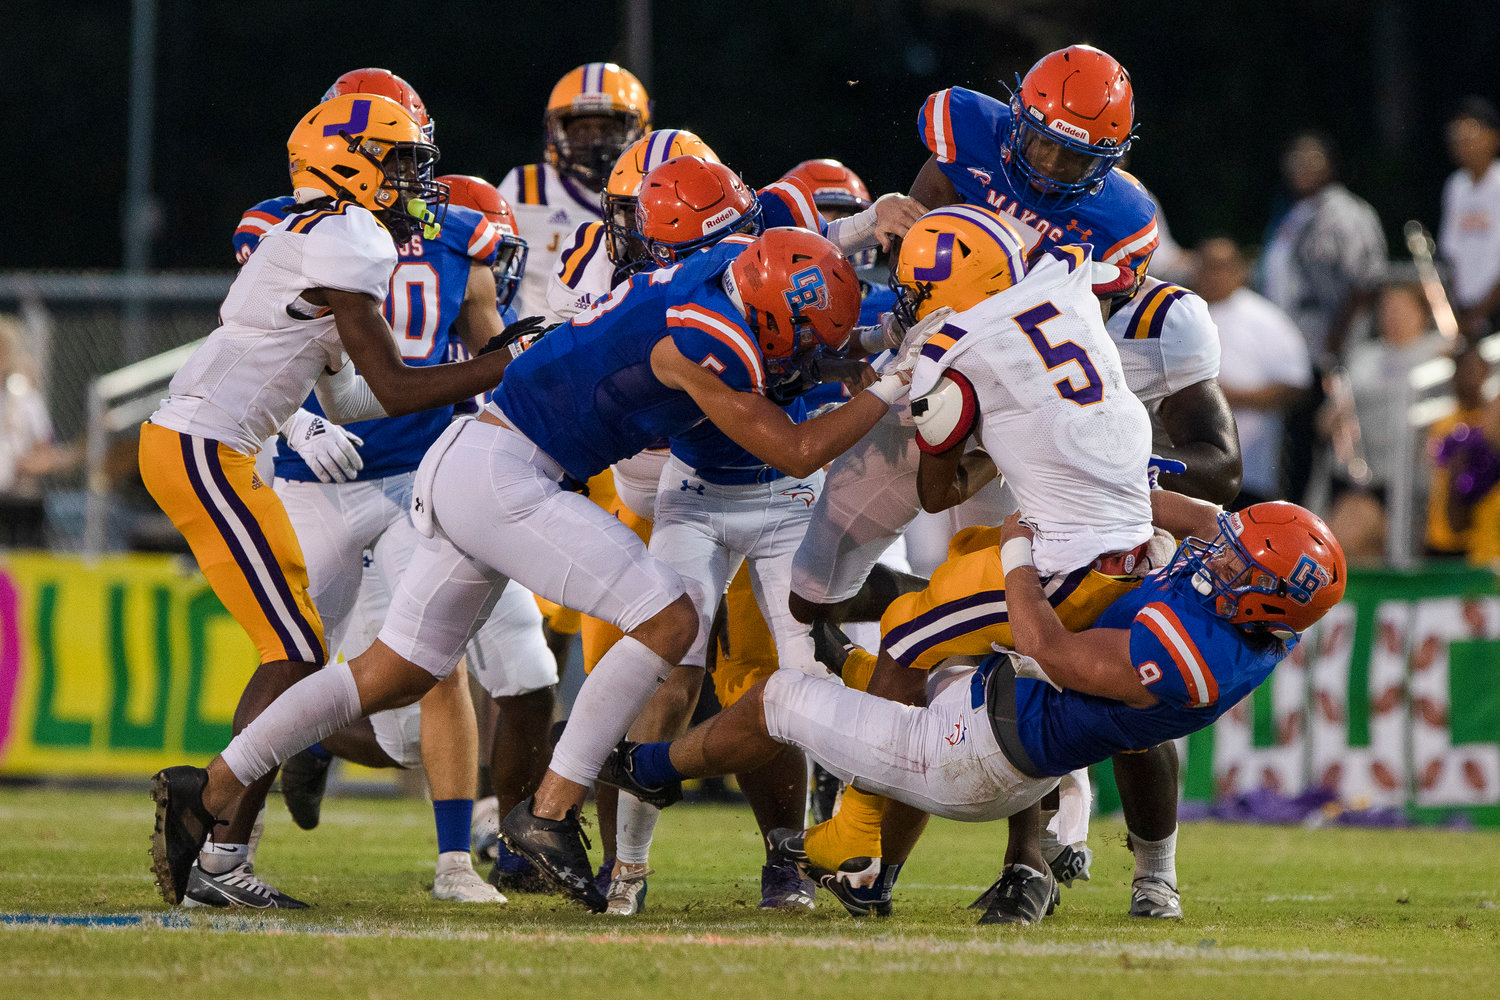 The Orange Beach defense swarms for a tackle in its region-opening win over Jackson Sept. 2 at home. In the school’s first season of being ranked, the Makos climbed to No. 8 in this week’s Class 4A rankings created by the Alabama Sports Writers Association.